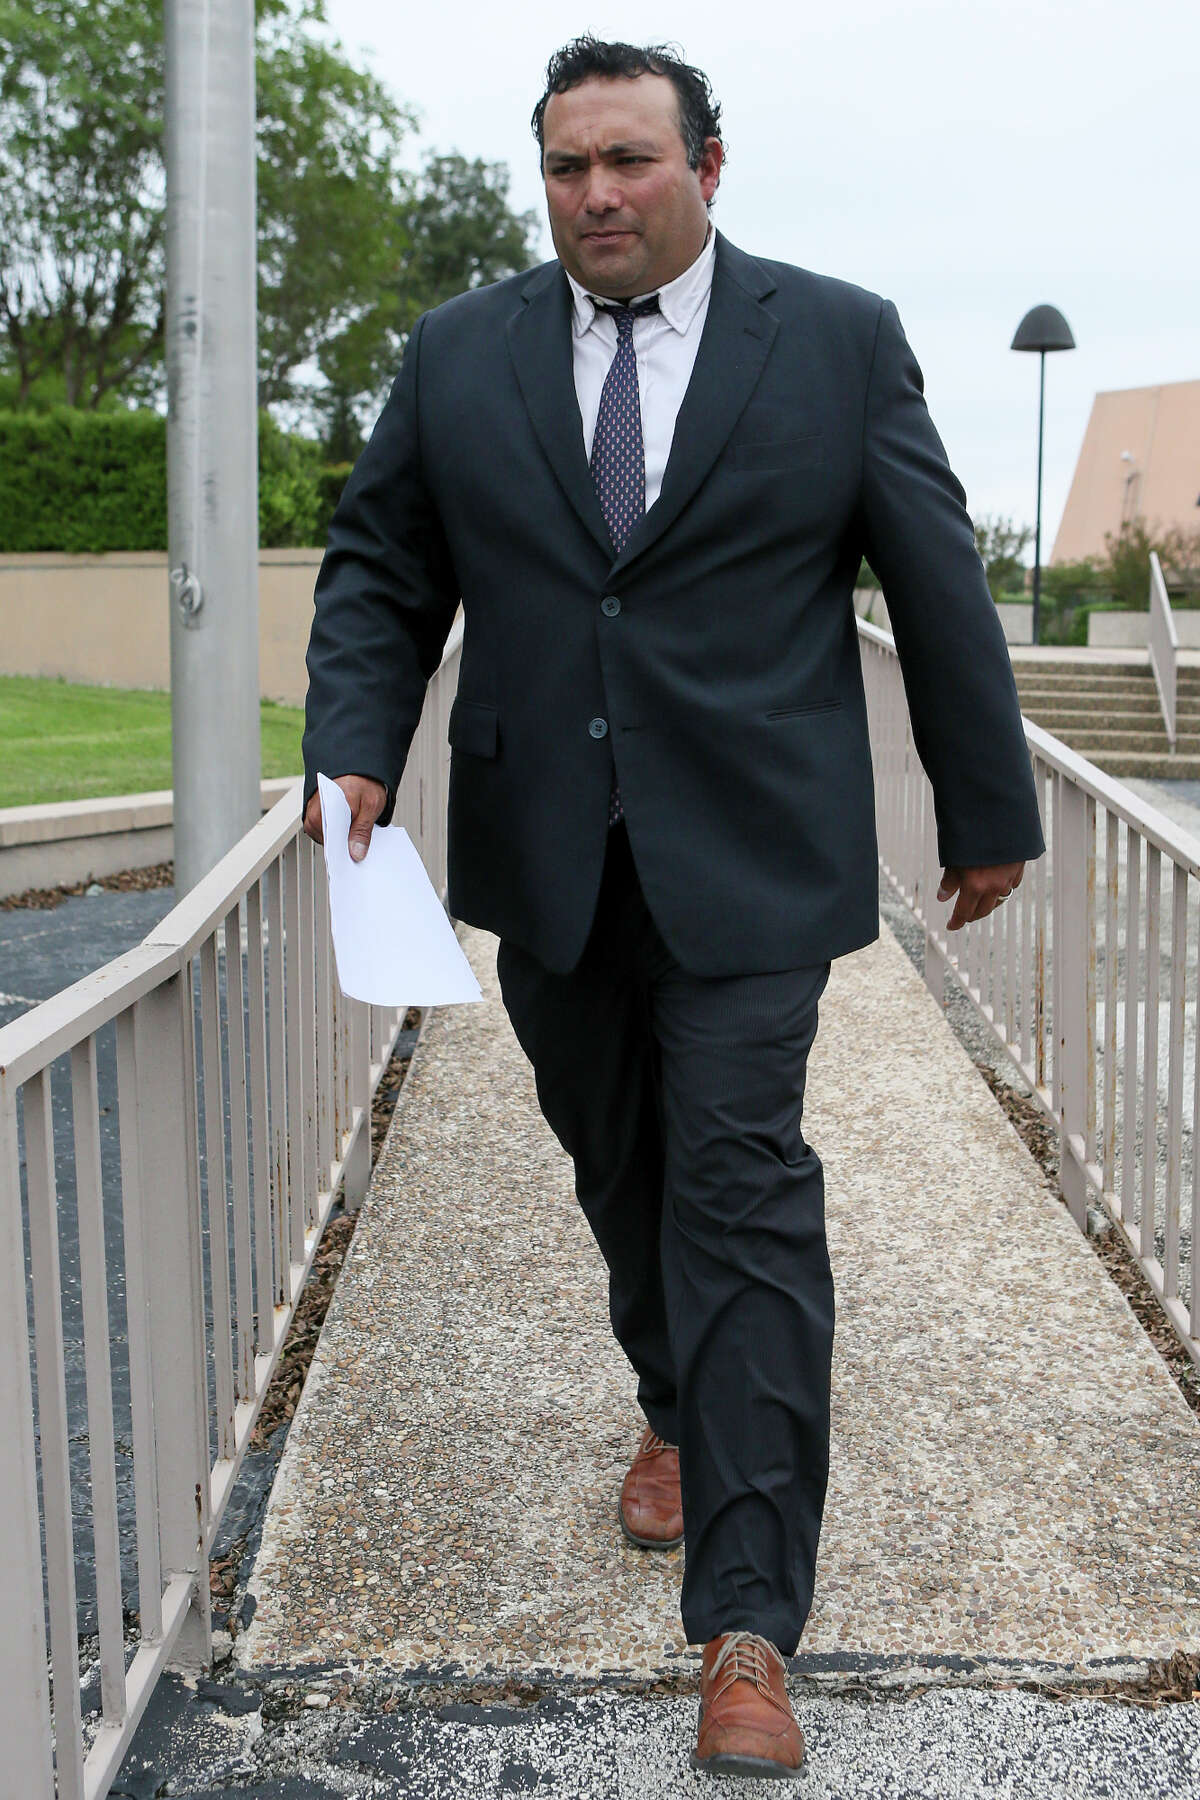 Former Harlandale ISD board trustee Joshua Cerna leaves the Federal Courthouse on Tuesday, Sept. 27, 2016, after pleading guilty to a fraud conspiracy charge as part of an FBI corruption investigation. MARVIN PFEIFFER/ mpfeiffer@express-news.net